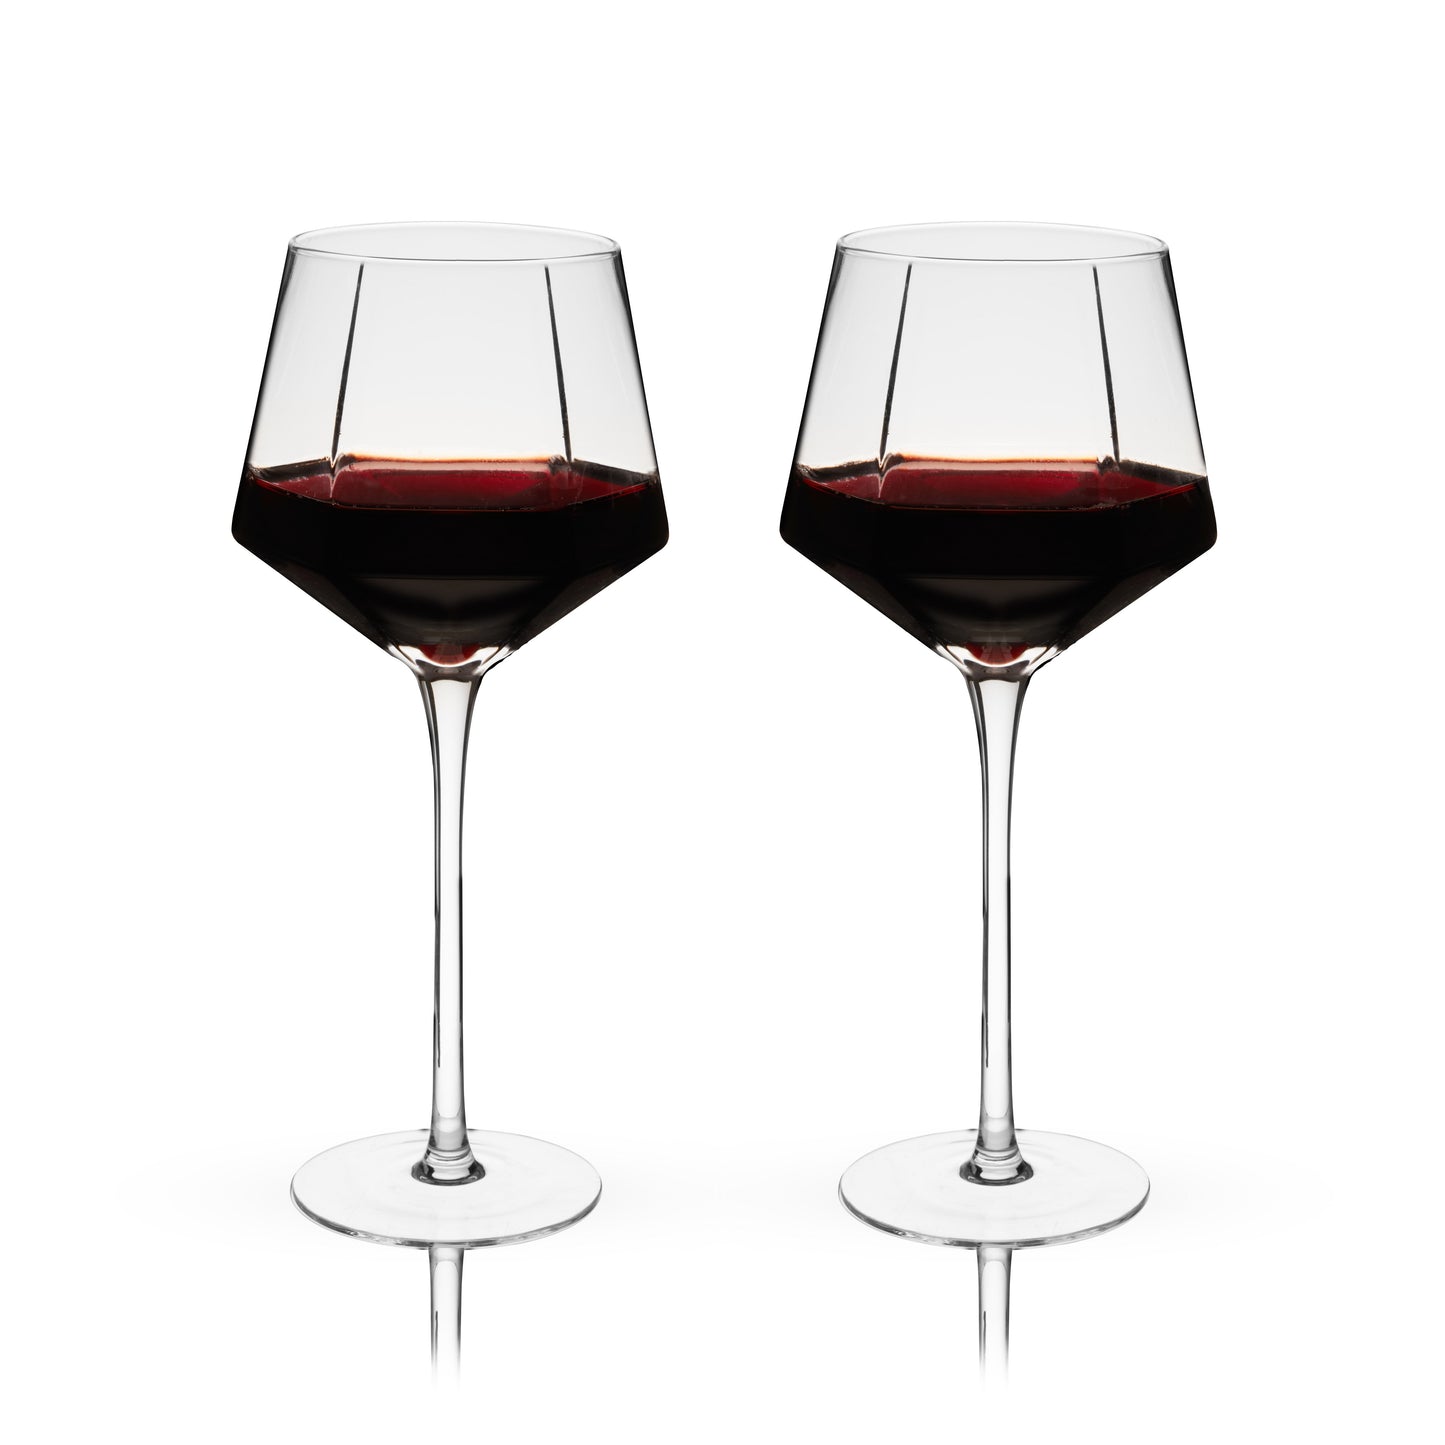 An angled base, faceted diamond design, and perfectly clear crystal give this set of wine glasses an otherworldly sparkle. Add contemporary glam to your favorite red wine, white wine, or rosé with this stemmed glassware.